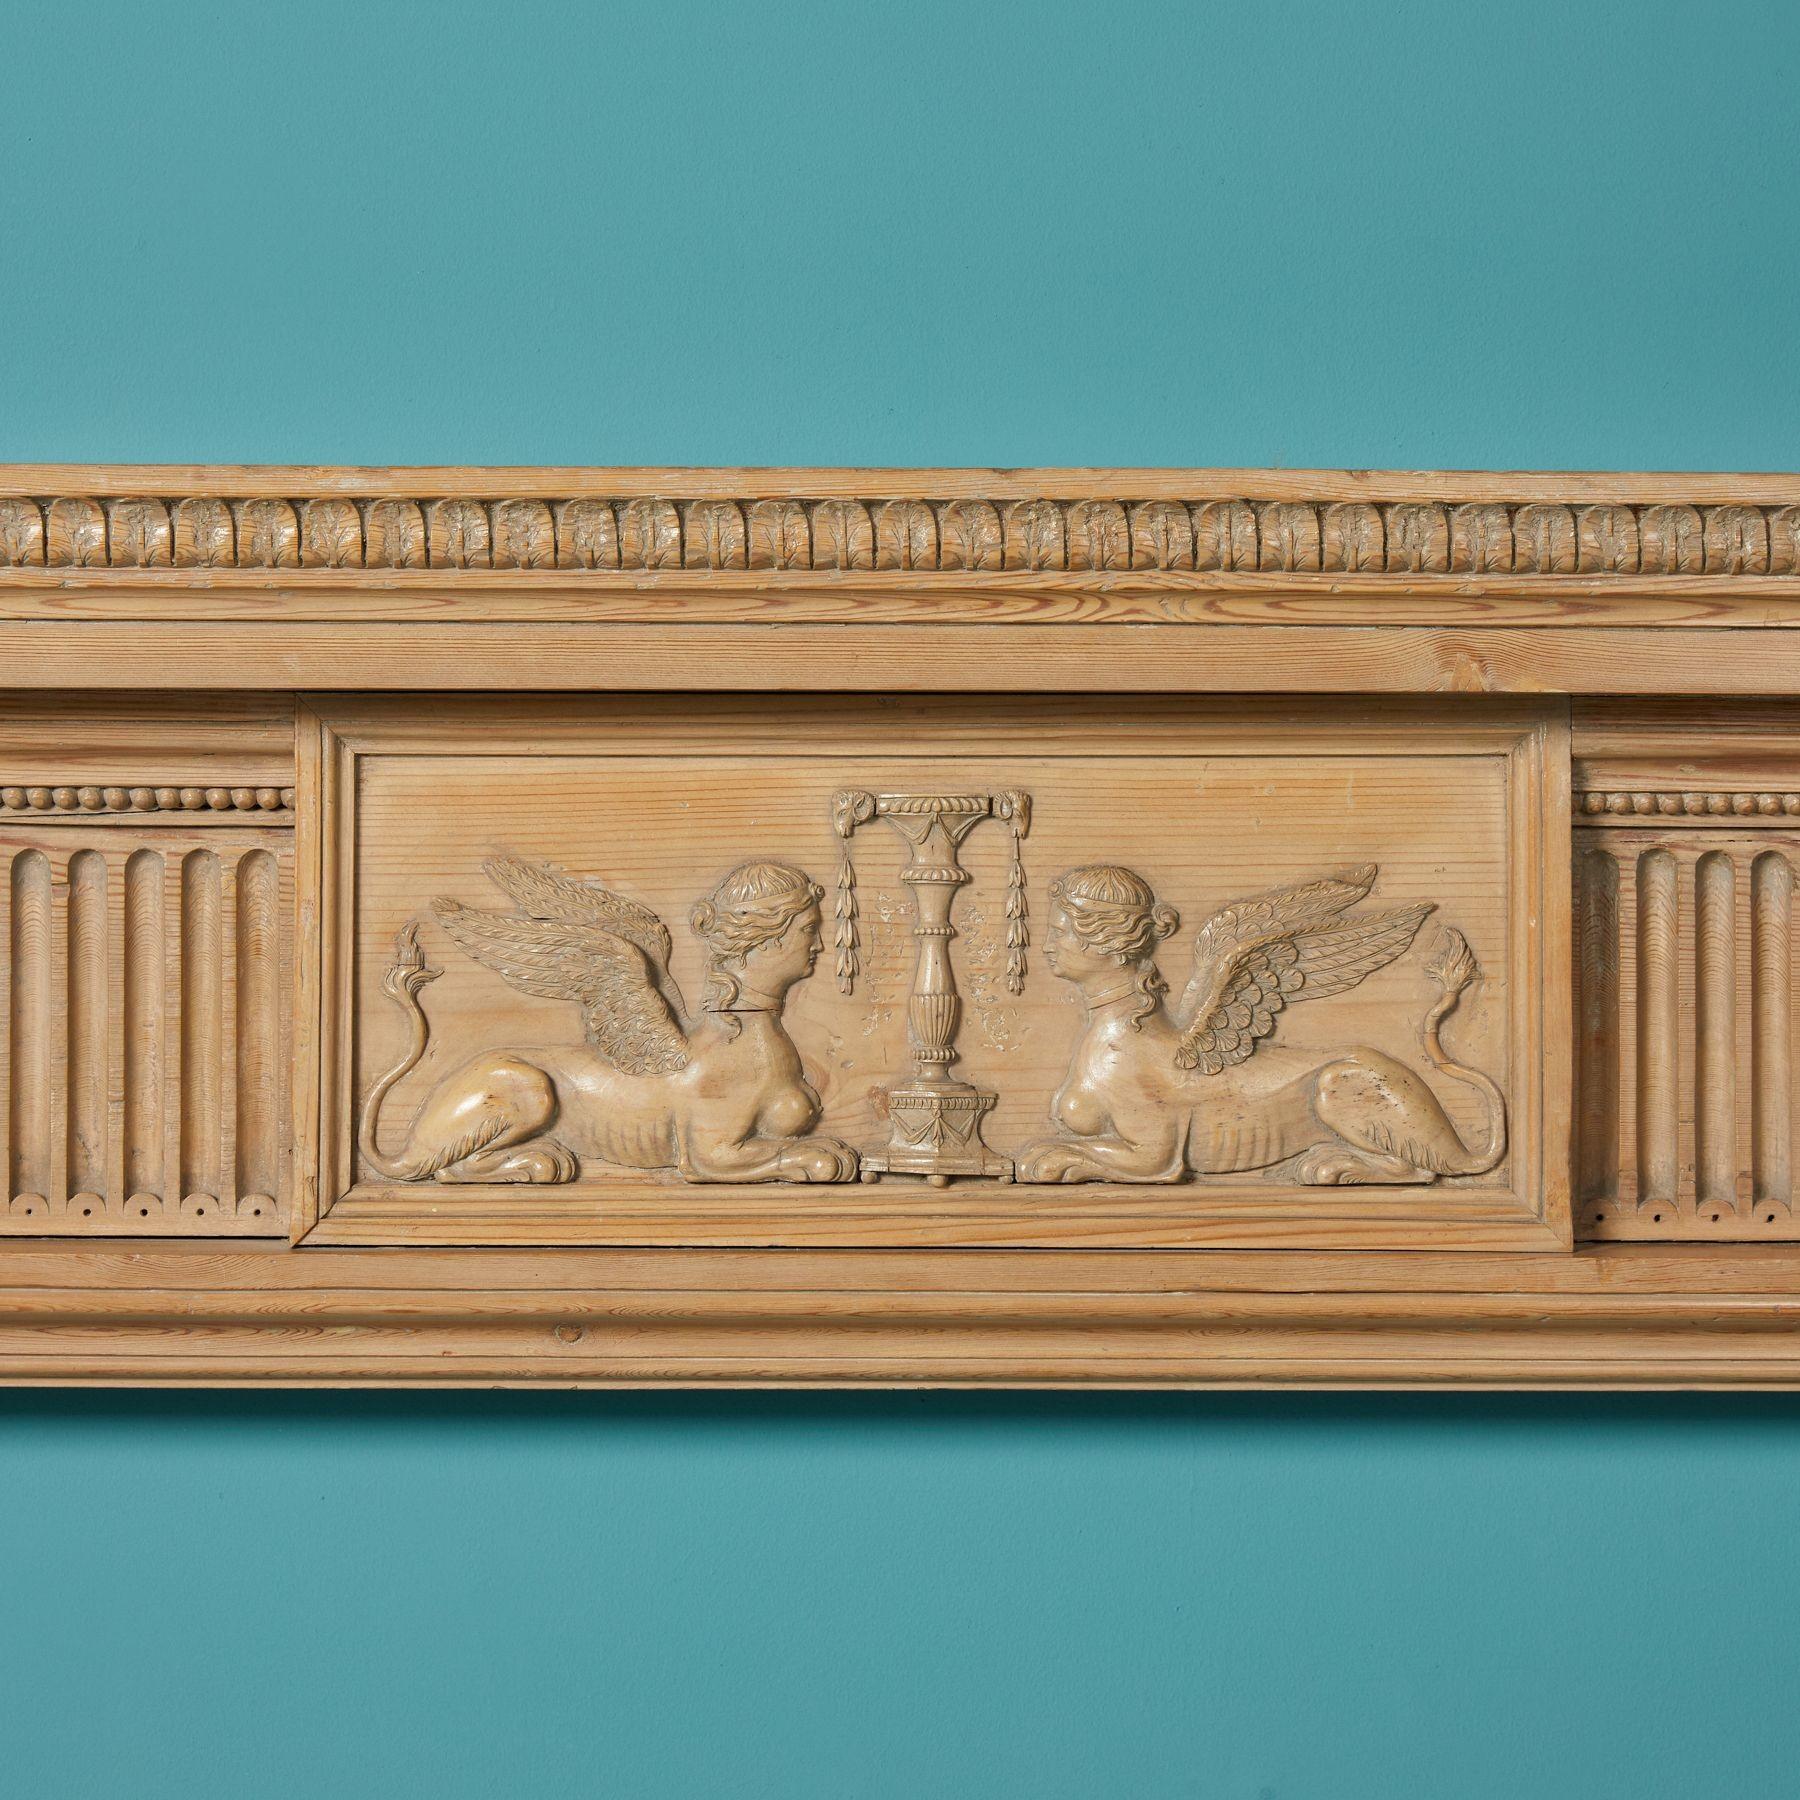 Antique English Neoclassical Style Fire Mantel In Good Condition For Sale In Wormelow, Herefordshire